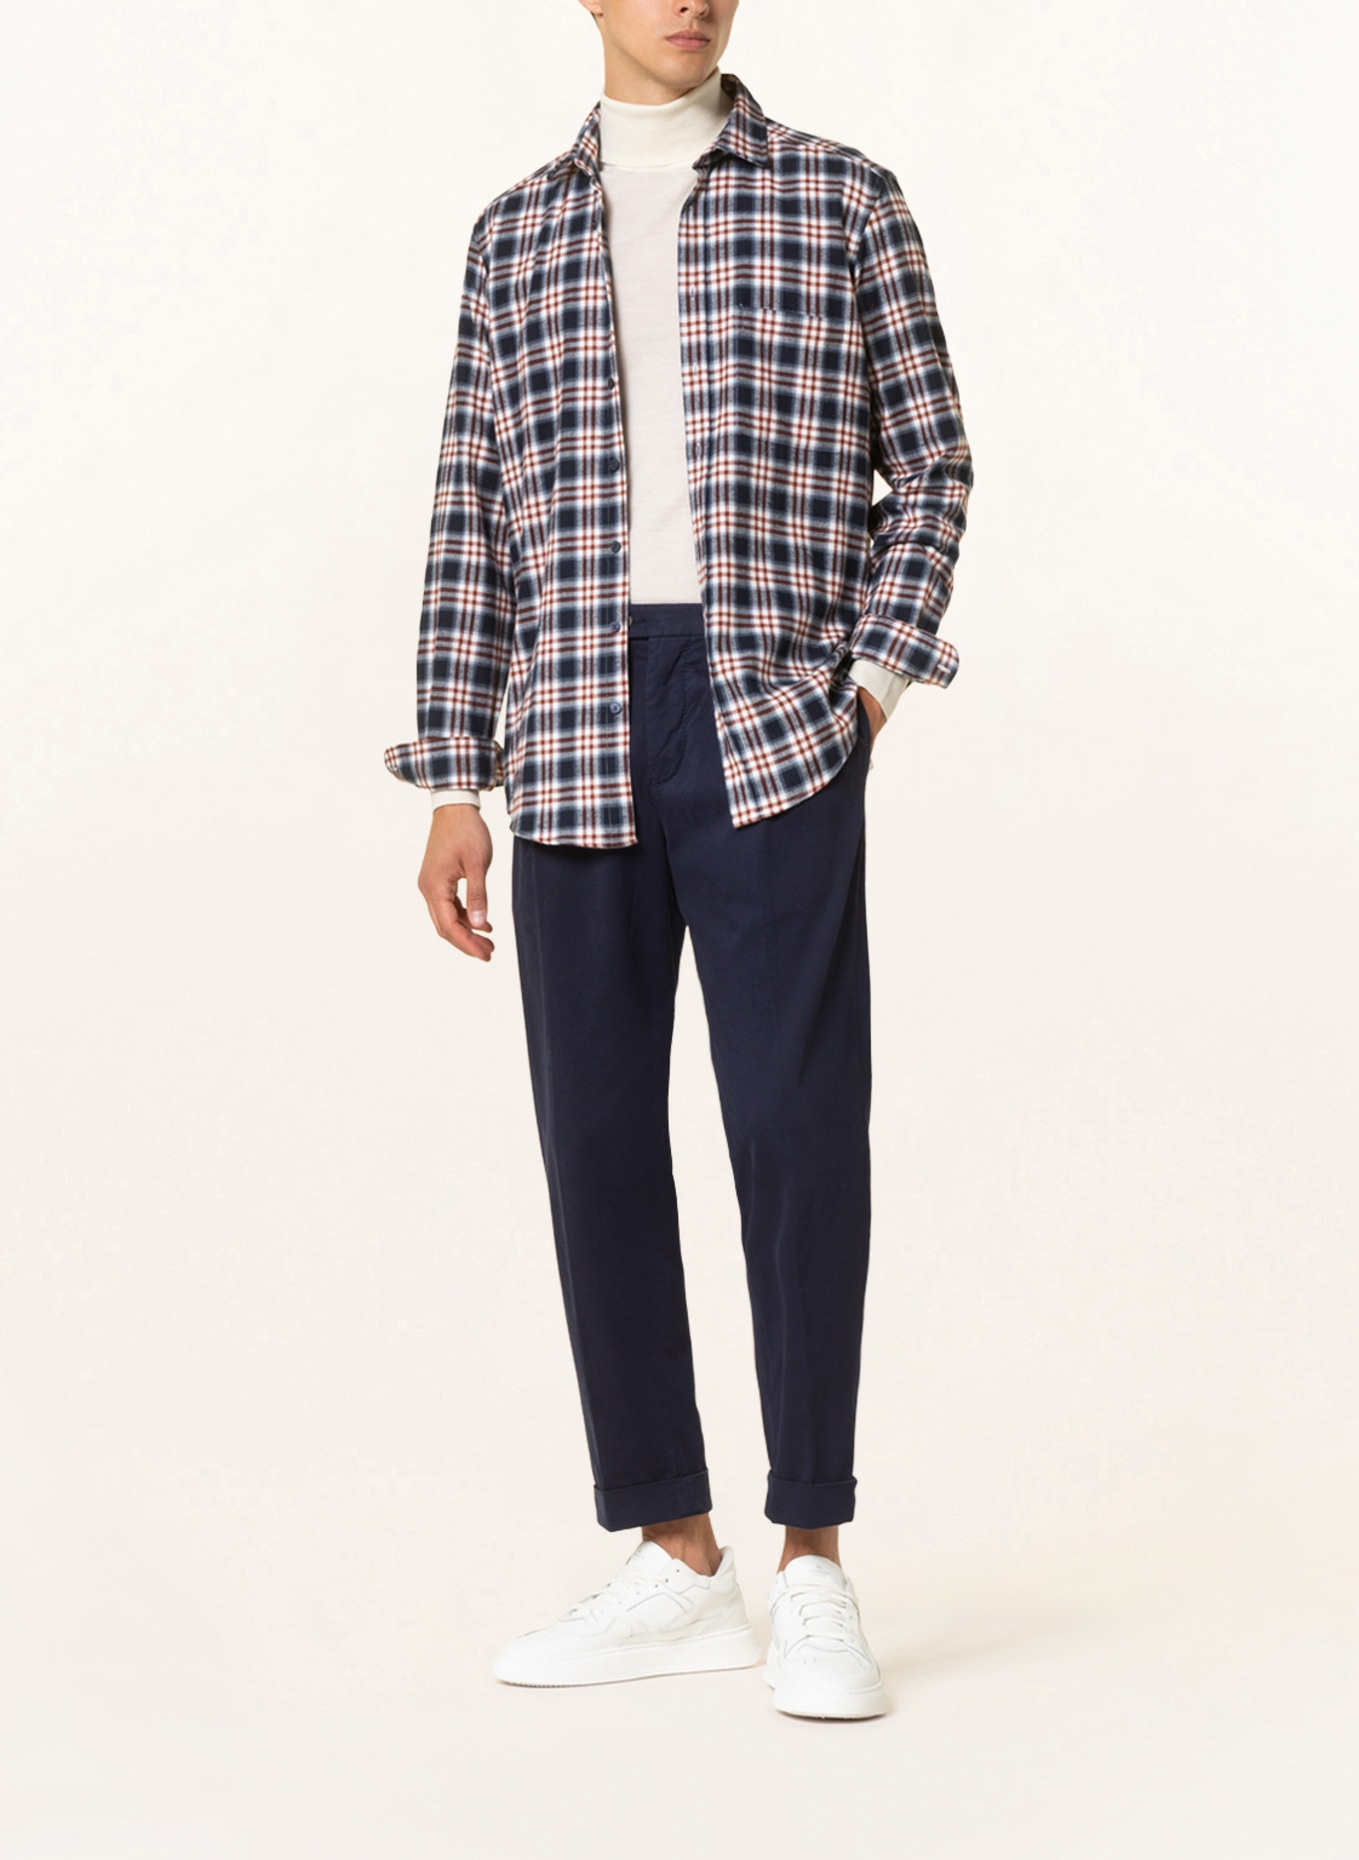 STROKESMAN'S Flannel shirt modern fit, Color: DARK BLUE/ WHITE/ RED (Image 2)